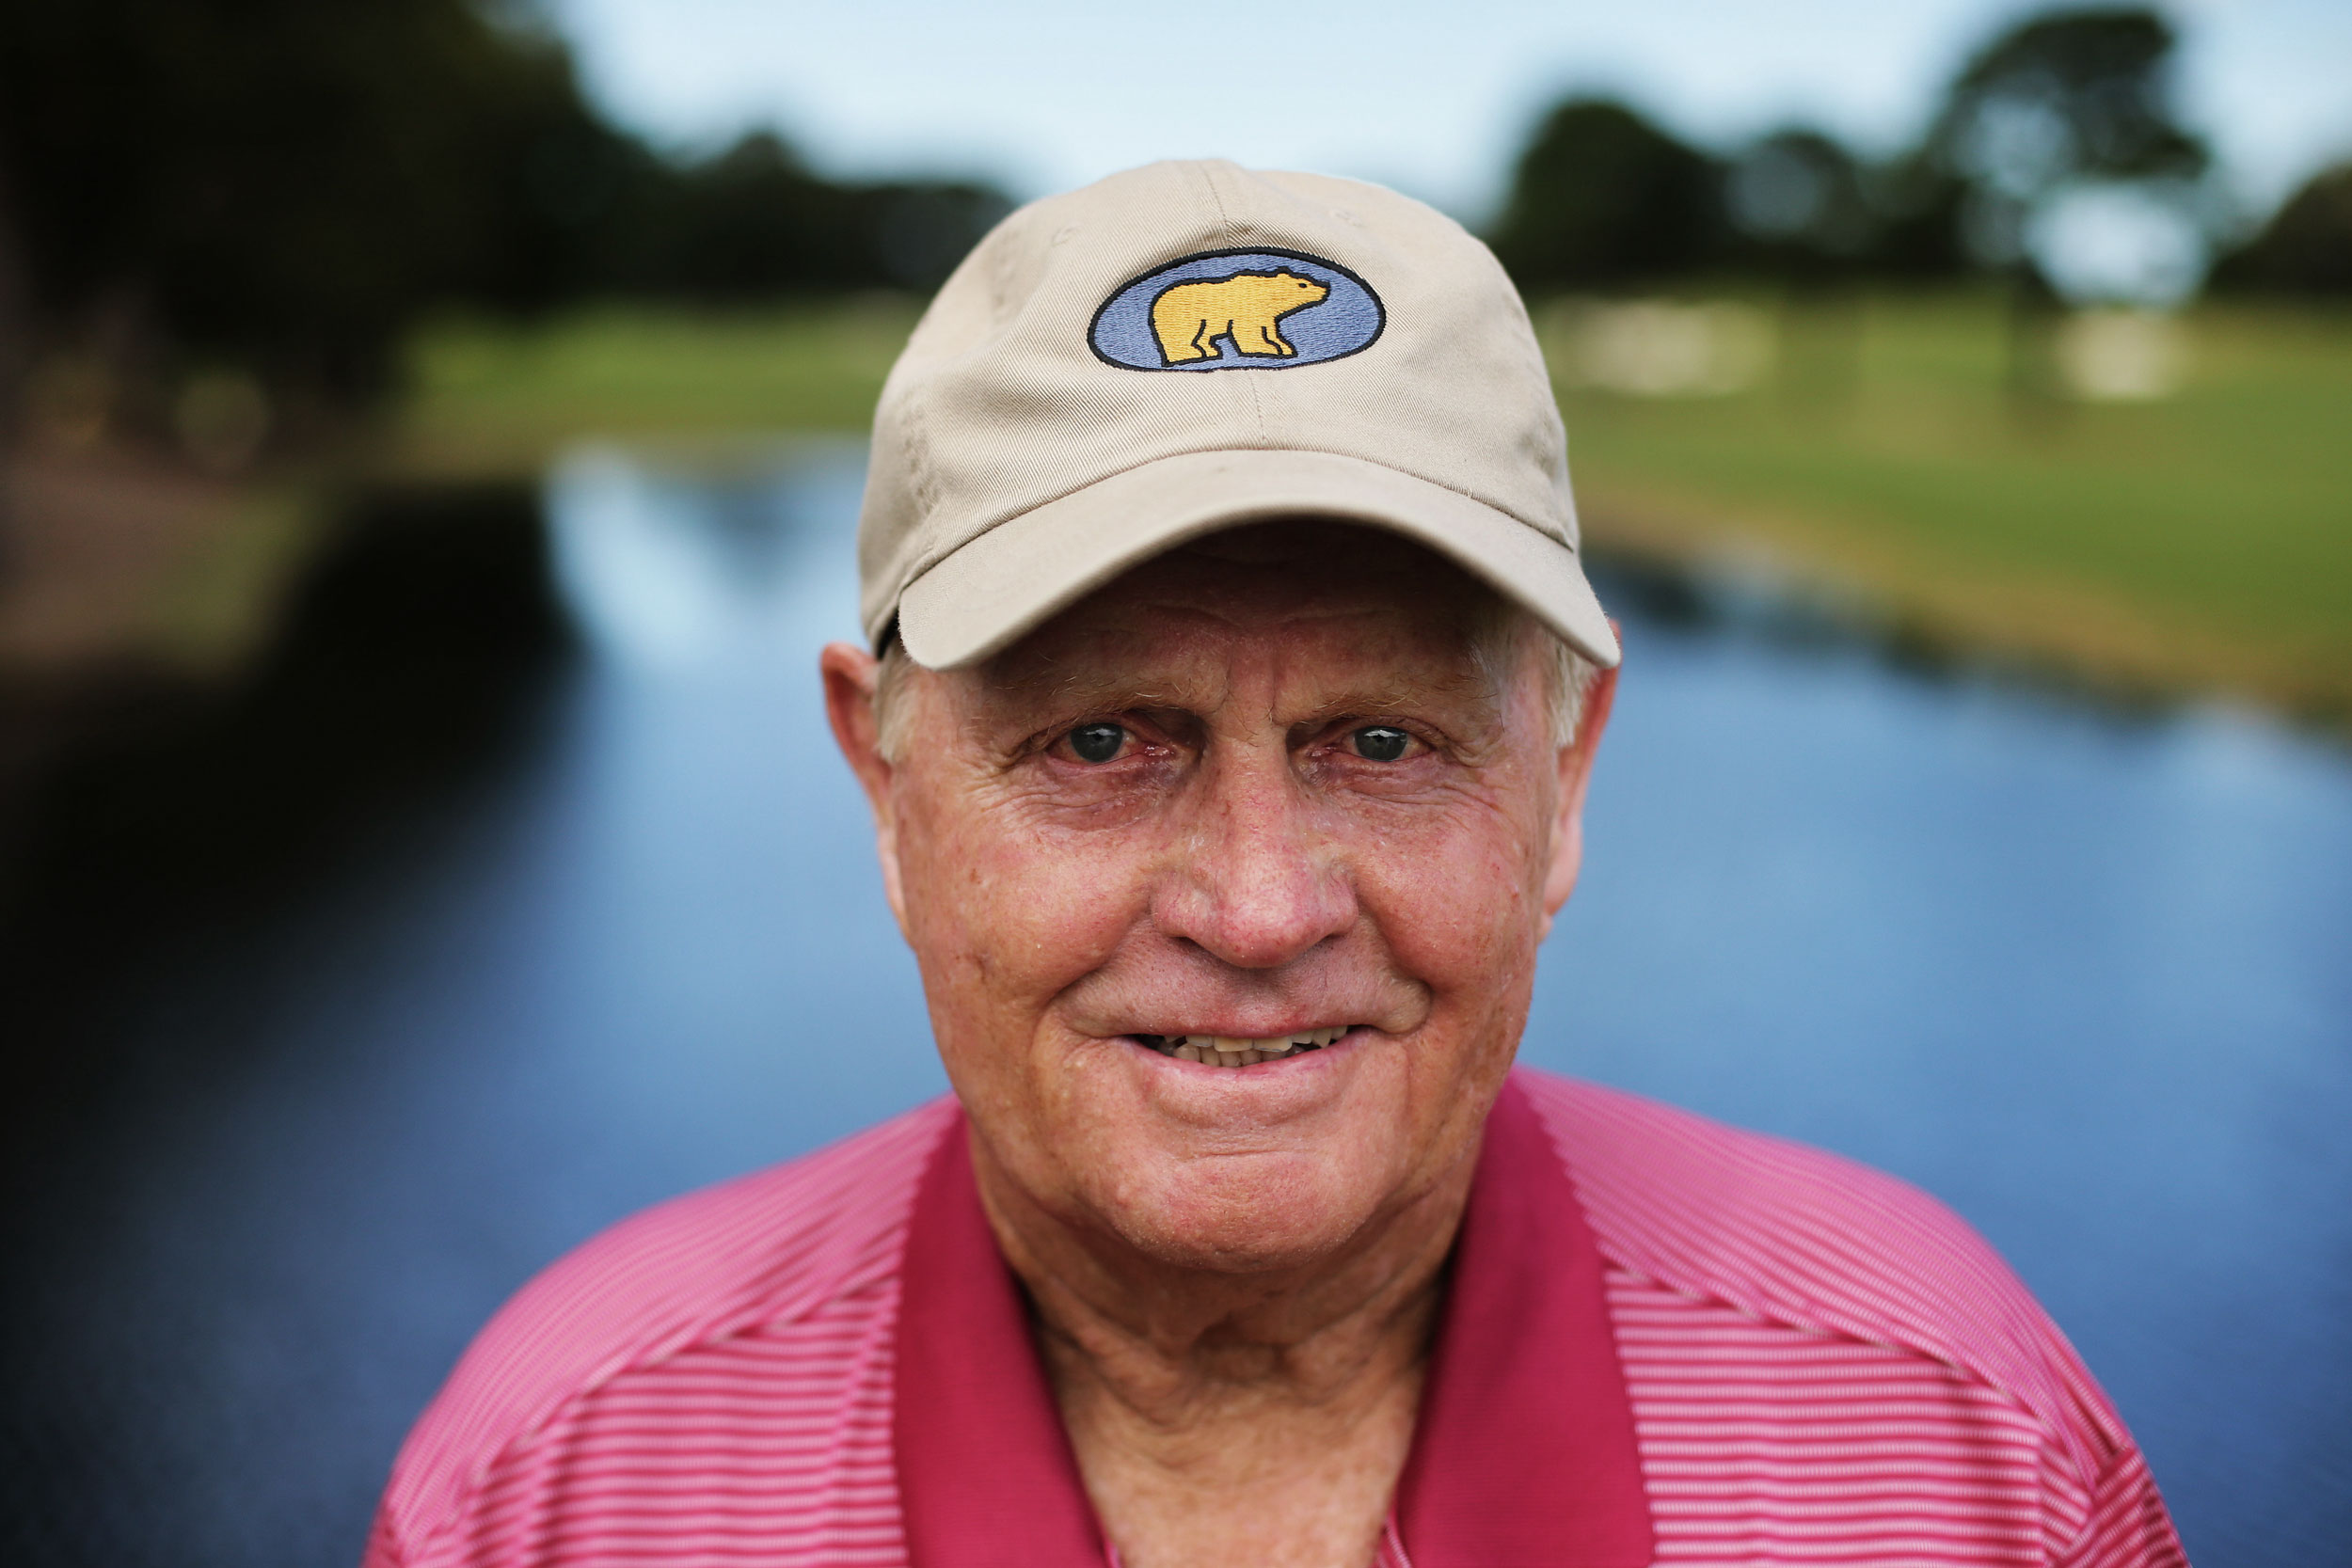 18-time major golf winner Jack Nicklaus launches his redesign at The Australian Golf Club in Sydney. Portrait of Jack Nicklaus on his redesigned course.